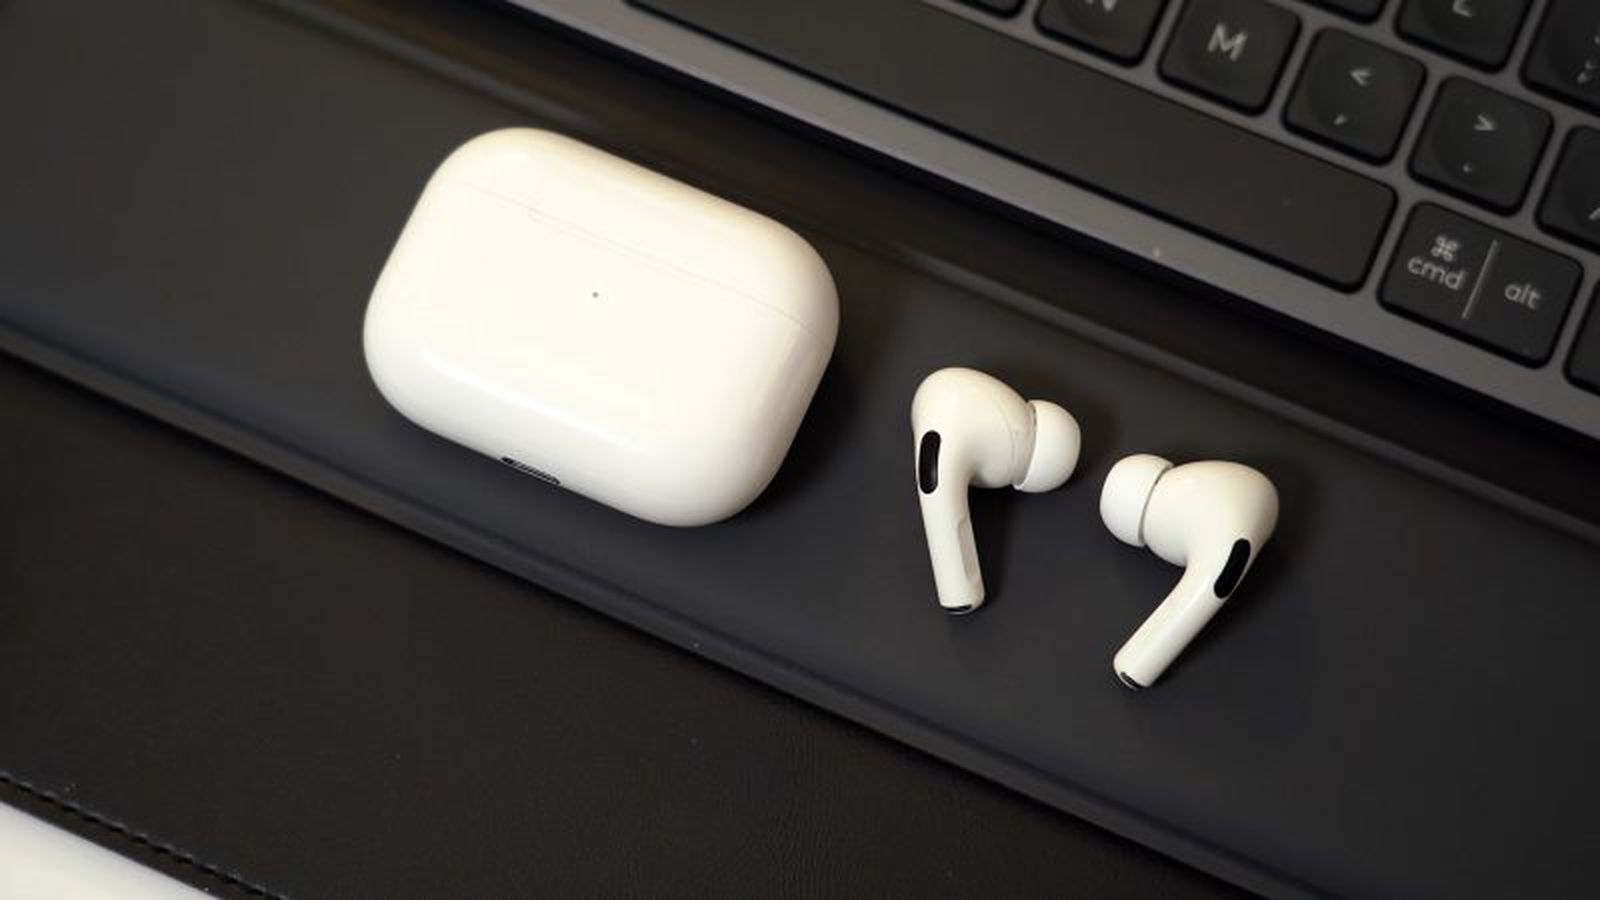 AirPods Pro 2C54 Firmware: Worse Canceling, Improved Frequency Response and Accuracy - MacRumors